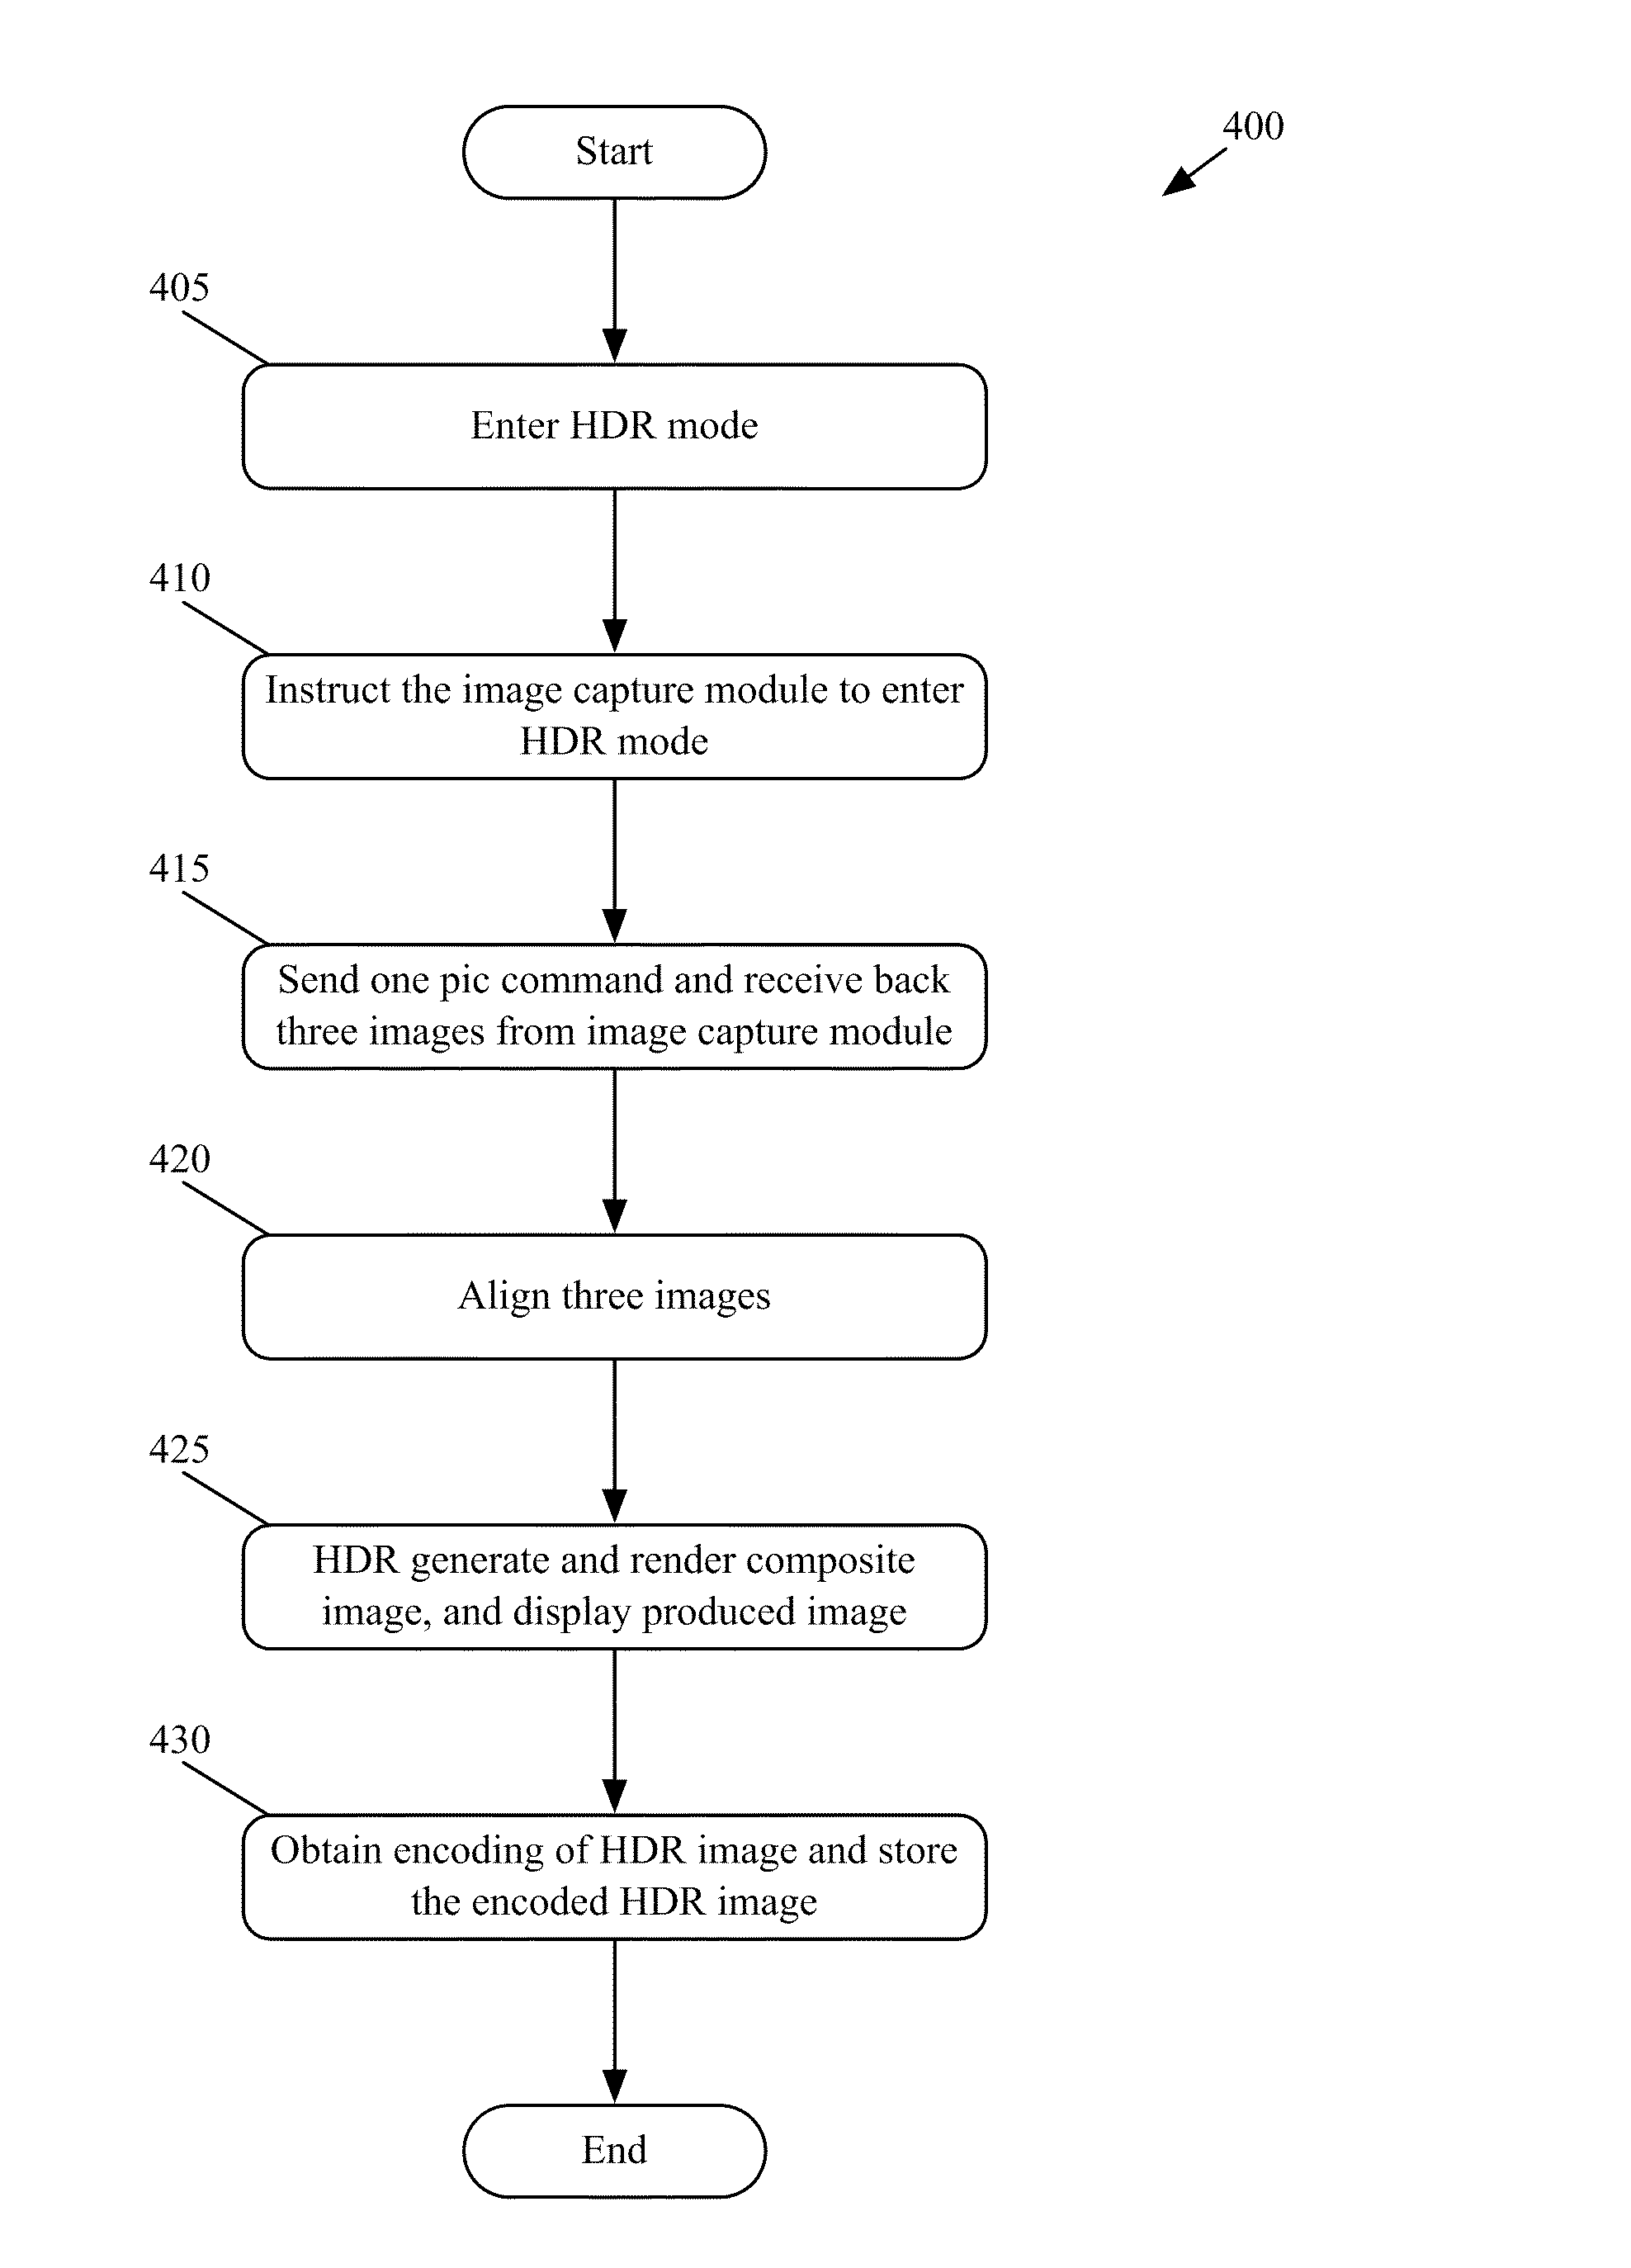 Operating a Device to Capture High Dynamic Range Images